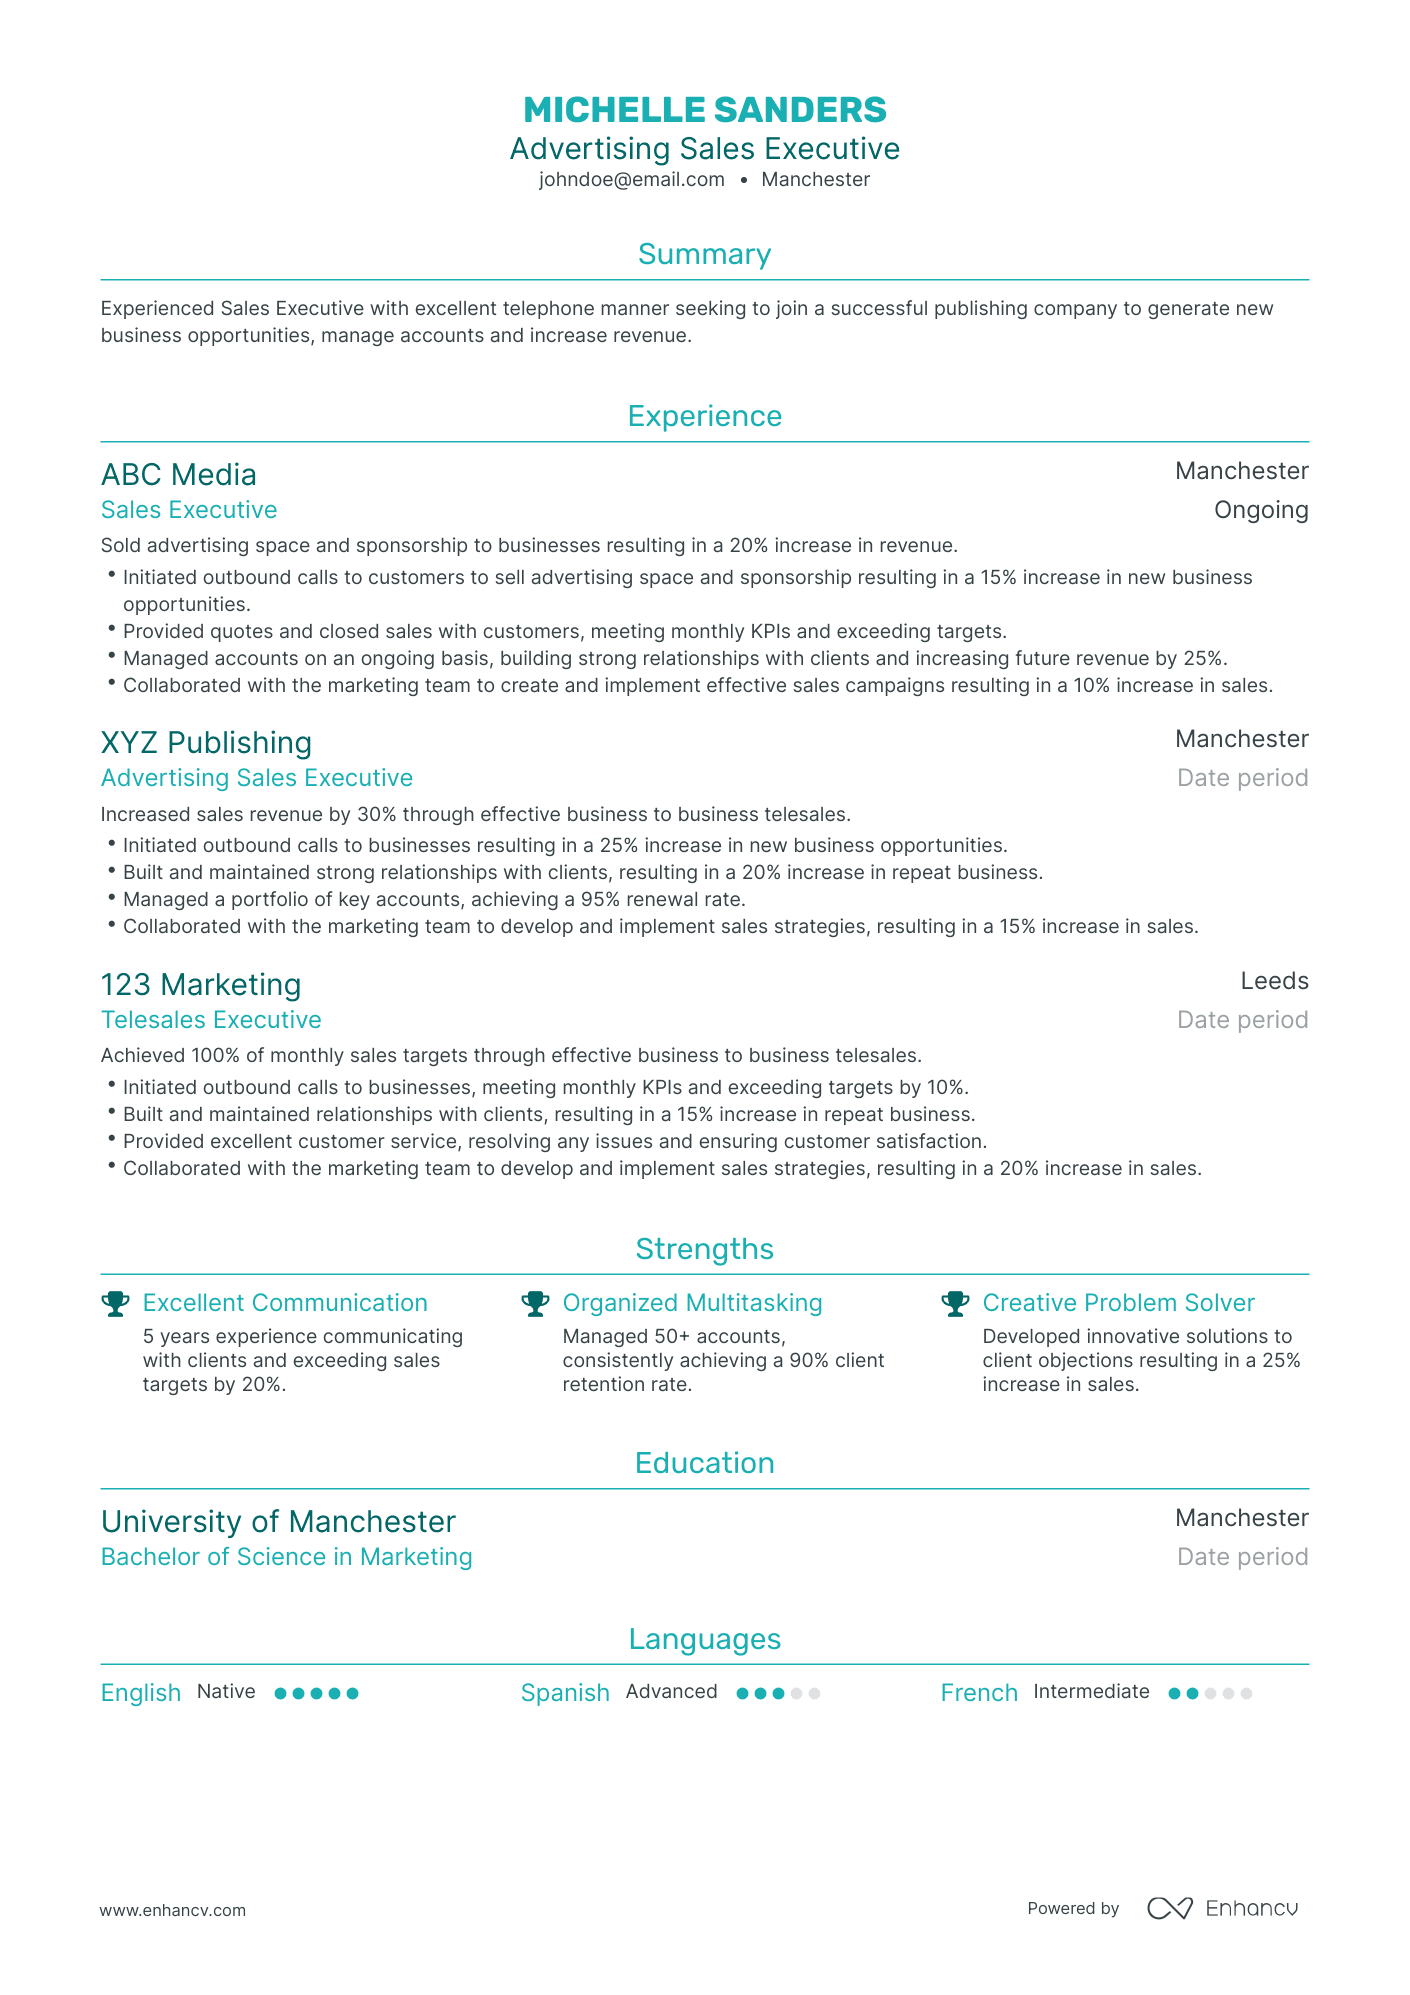 Traditional Advertising Sales Executive Resume Template